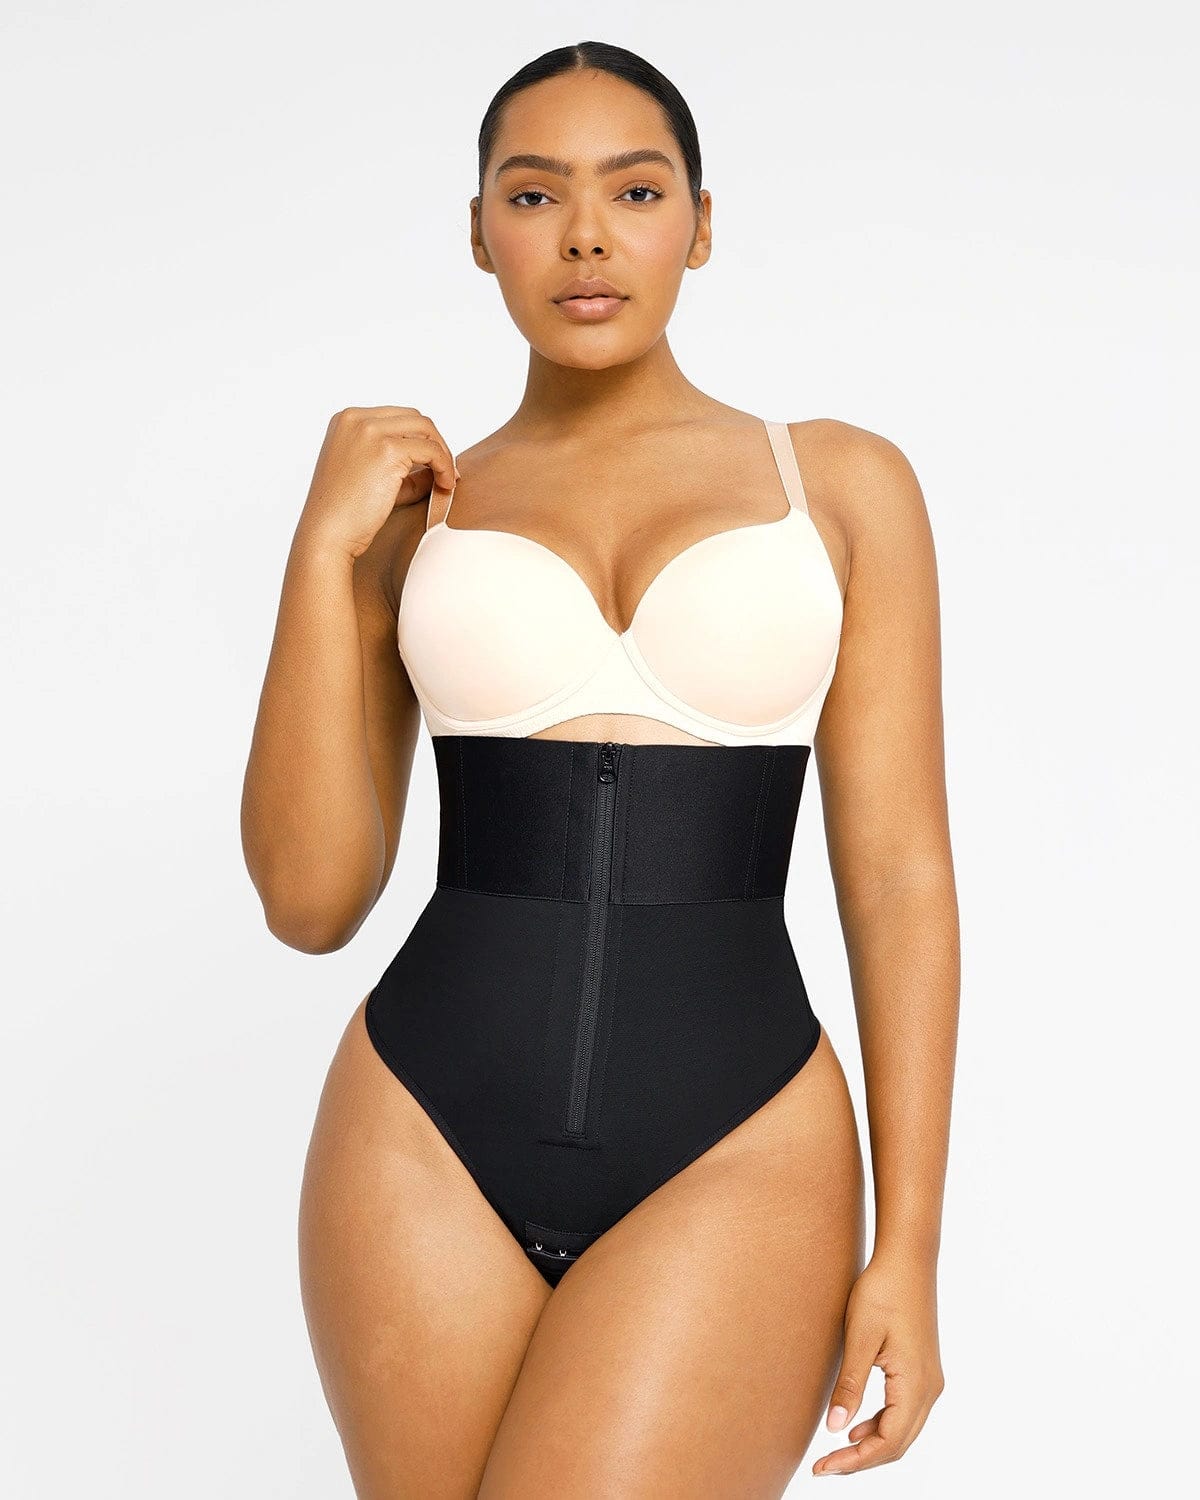 AirSlim® Lace Smooth Full Body Shaper